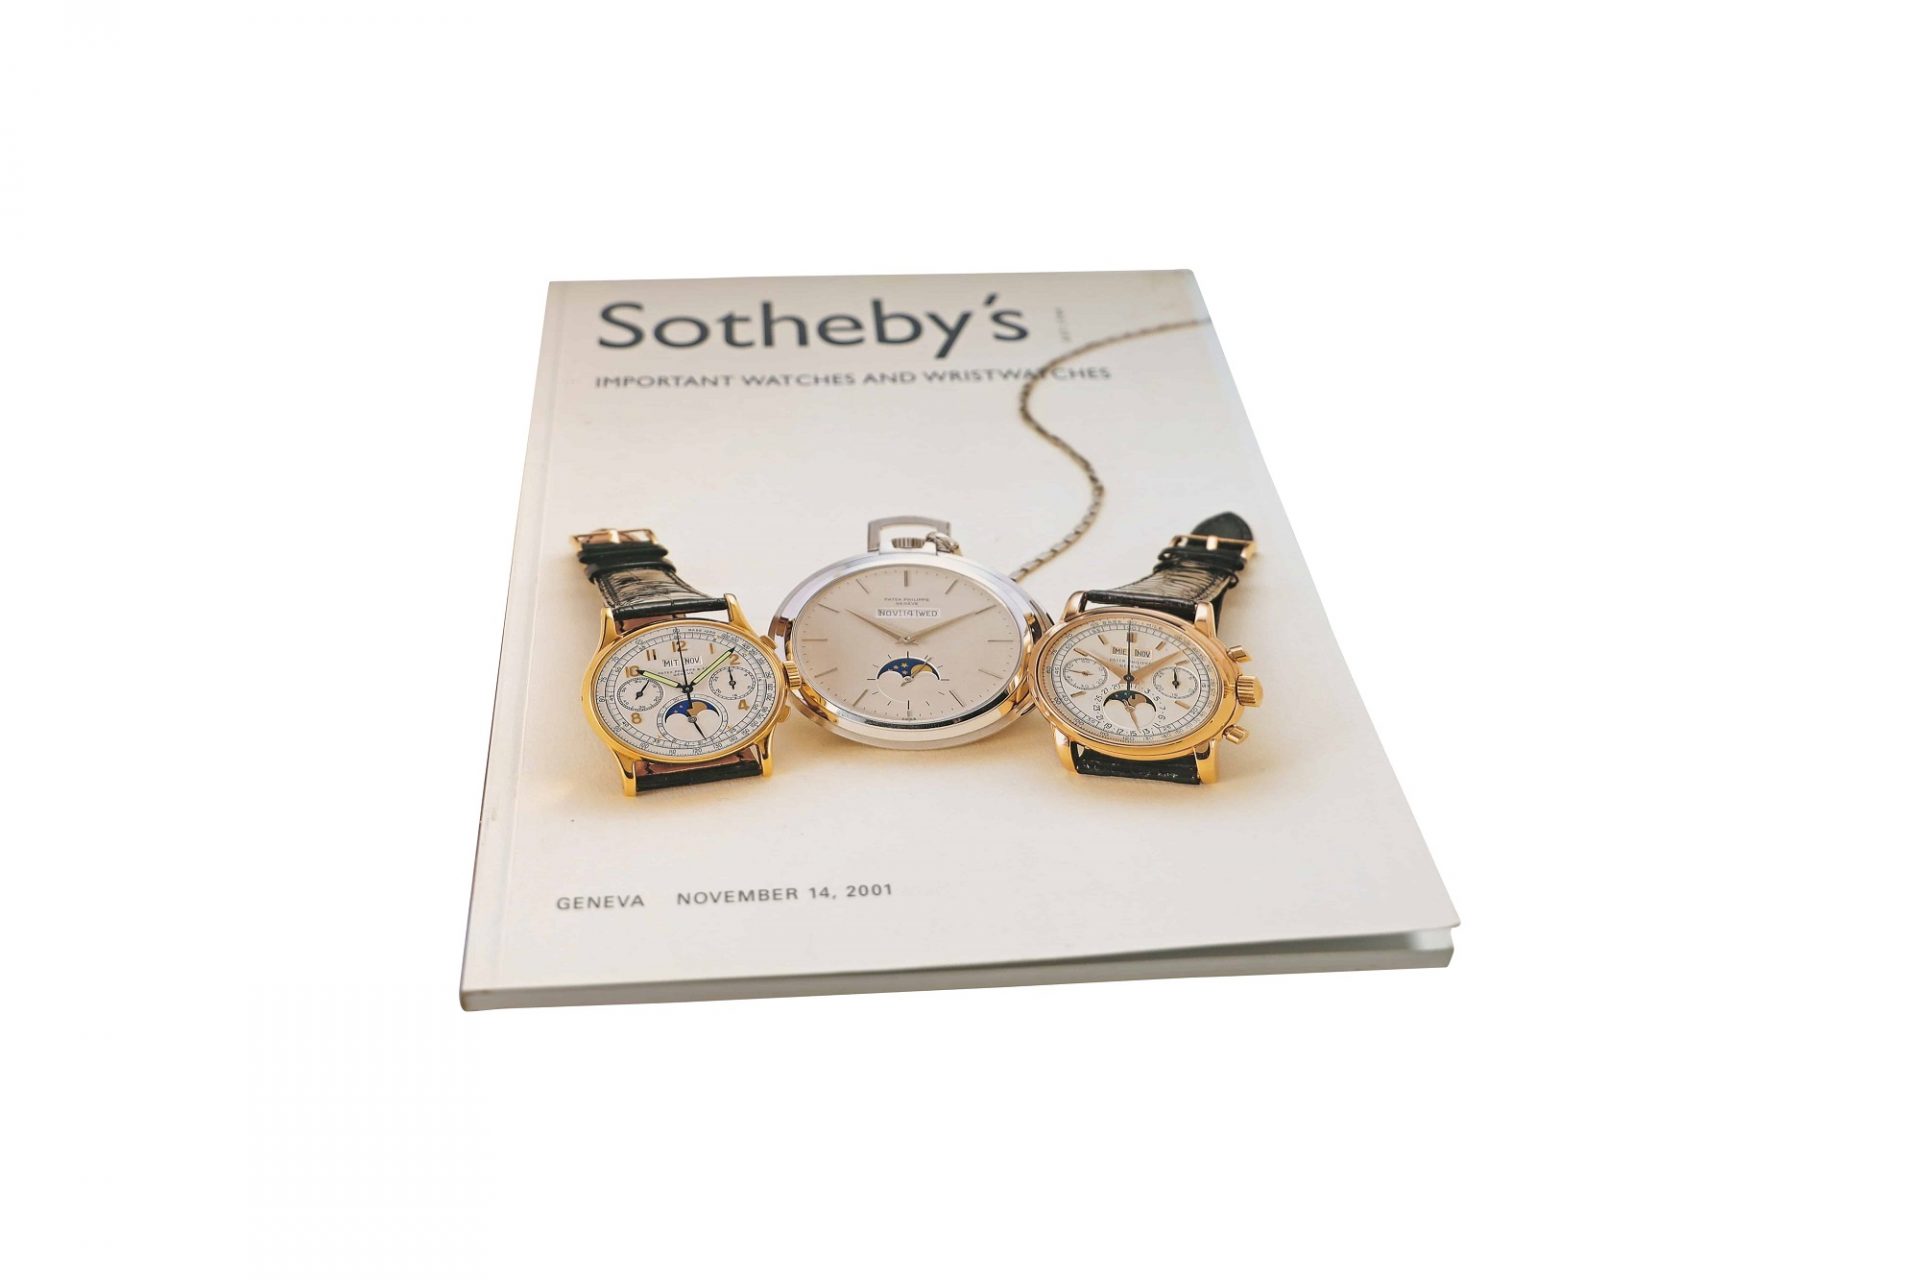 Sotheby's Important Watches, Wristwatches Geneva November 14, 2001 Auction Catalog - Rare Watch Parts